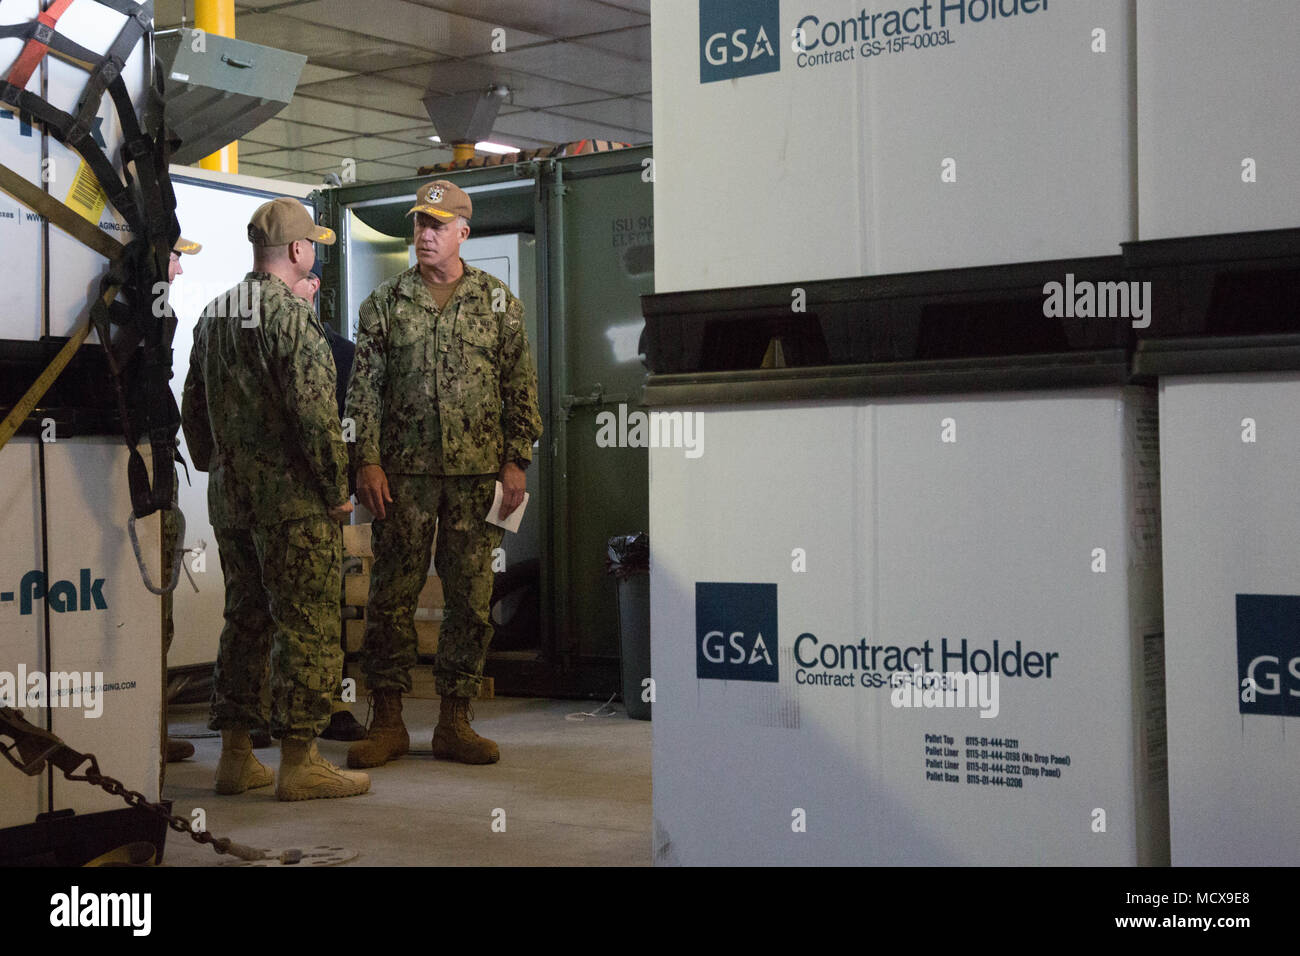 180305-A-WO440-0046 MAYPORT, Fla. (March 5, 2018) Rear Admiral Sean Buck, Commander, U.S. Naval Forces Southern Command/U.S. 4th Fleet, speaks with Capt. Angel Cruz, Commodore of Destroyer Squadron (DESRON) 40, from Miami, Florida, aboard the expeditionary fast transport vessel USNS Spearhead (T-EPF 1). U.S. Naval Forces Southern Command/U.S. 4th Fleet has deployed a force to execute Continuing Promise to conduct civil-military operations including humanitarian assistance, training engagements, and medical, dental, and veterinary support in an effort to show U.S. support and commitment to Cent Stock Photo